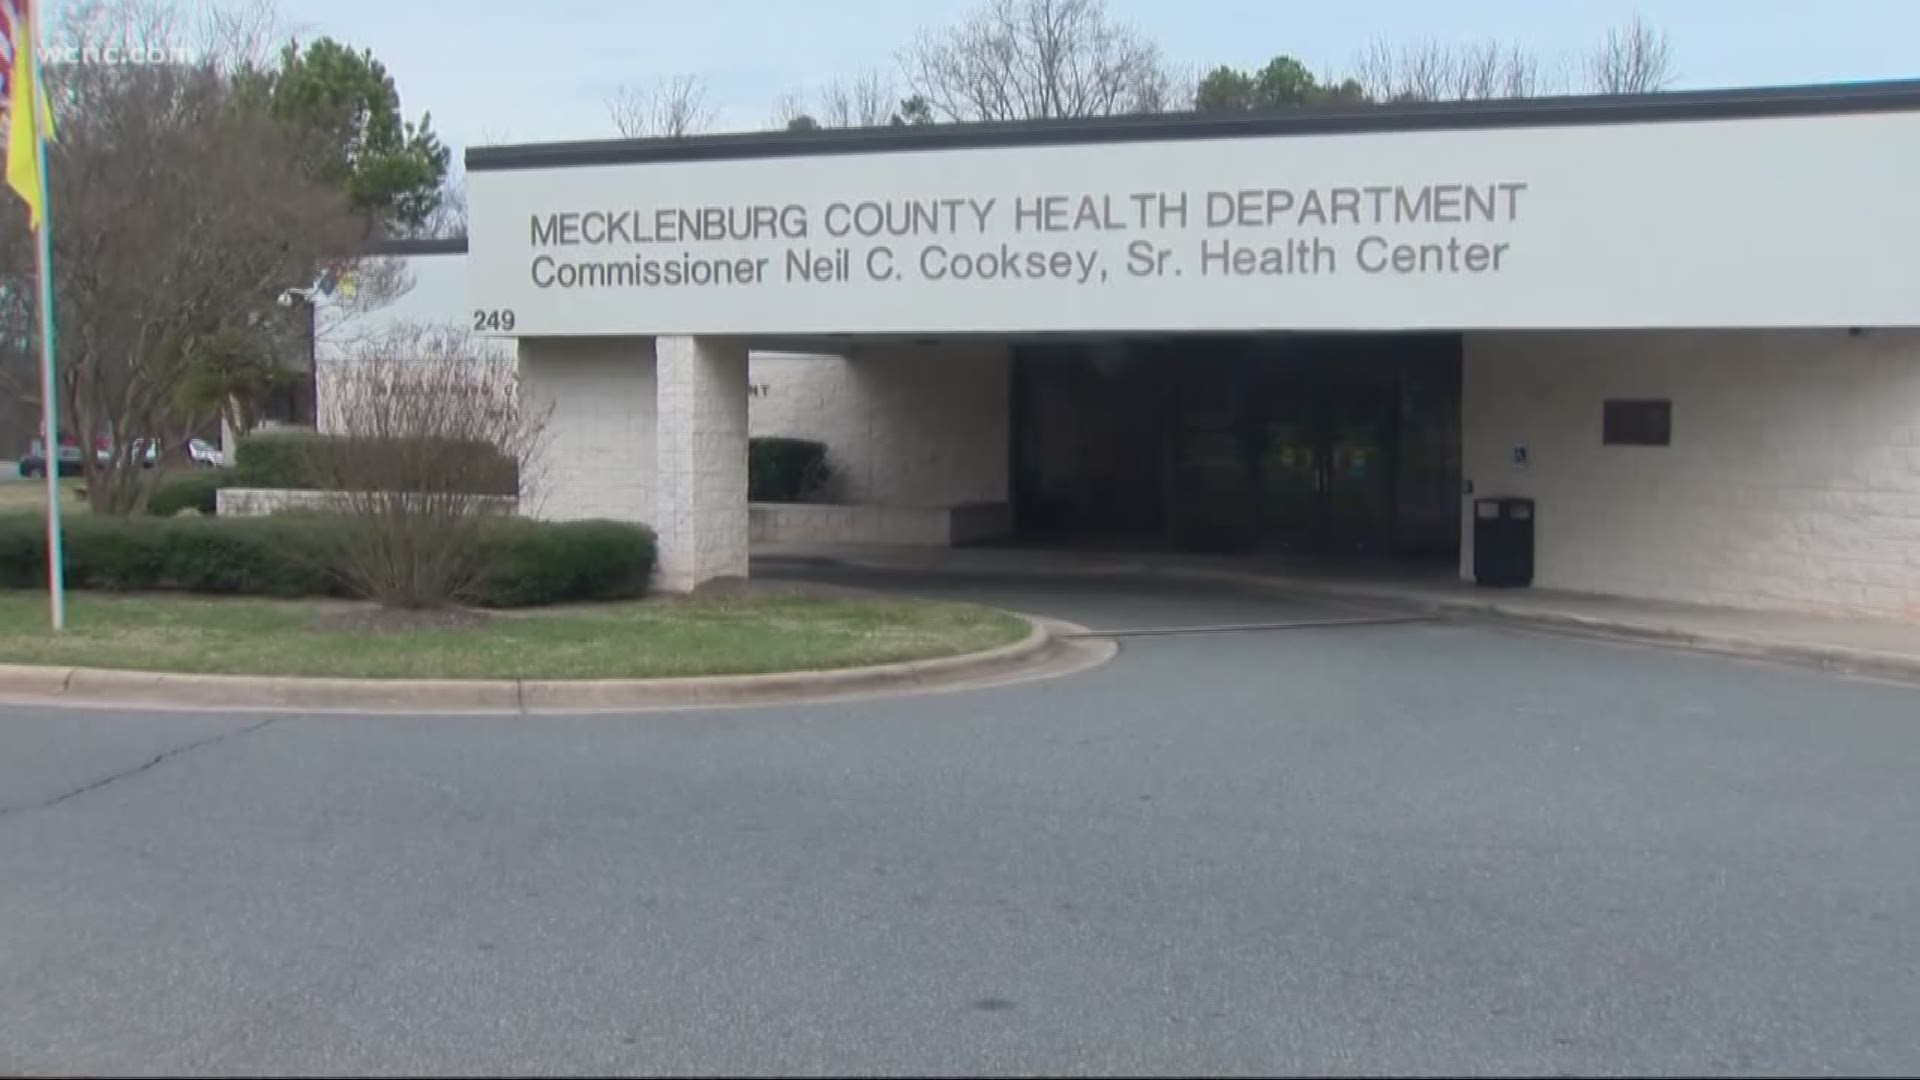 The group held a news conference Friday in support of a fired technician in the county health department who says he was let go for being a whistleblower.